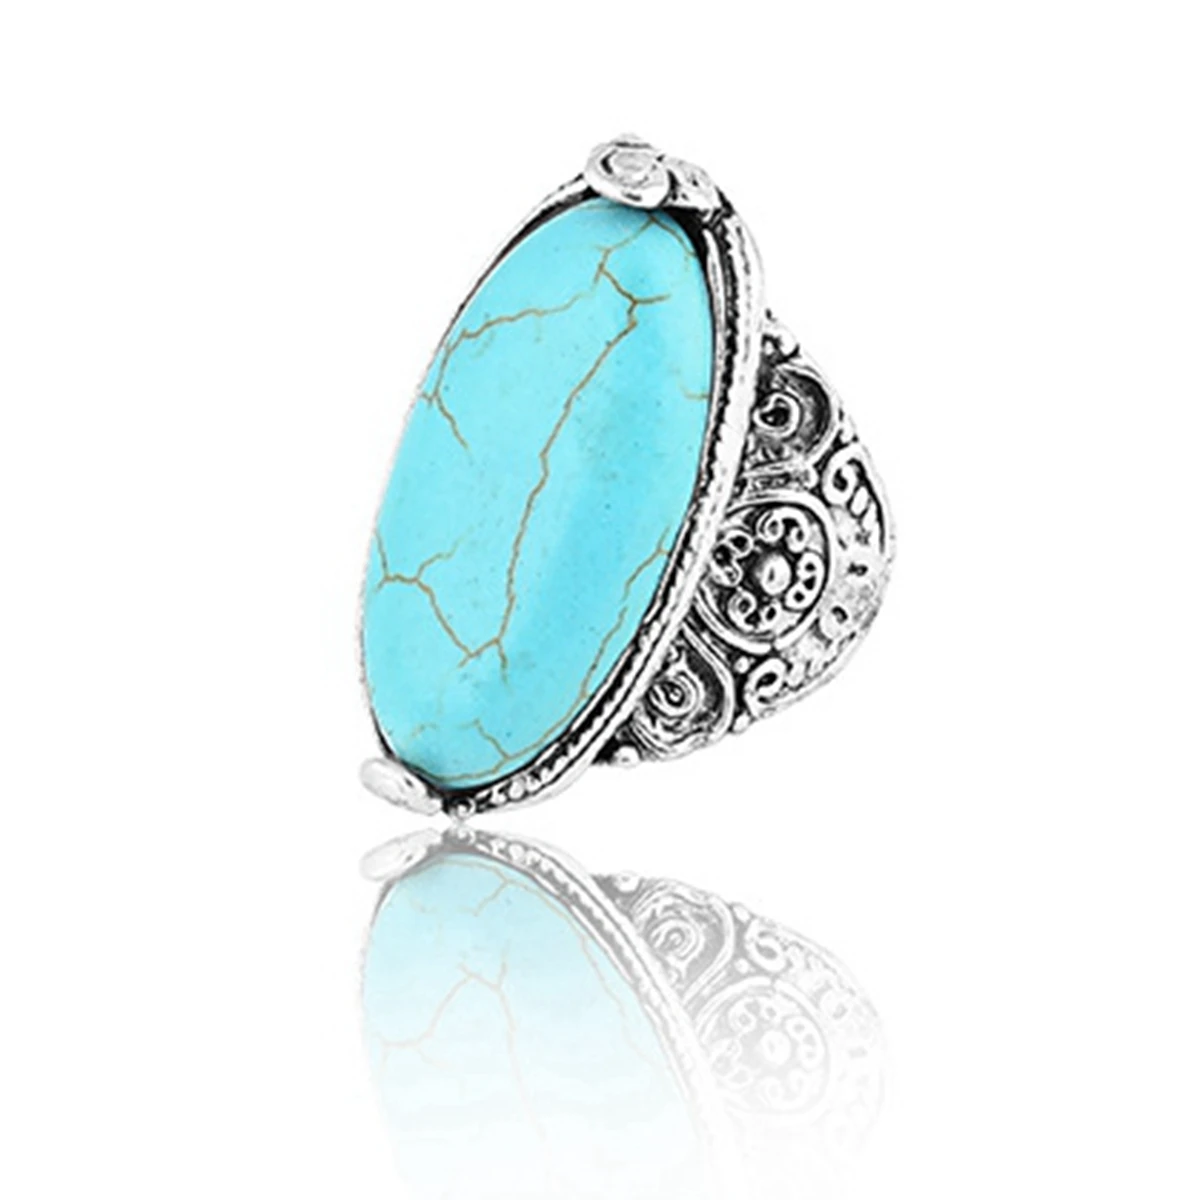 

Women's Fashion Turquoise Ring Silver Alloy Oval Gemstone CAB Knuckle Vintage Bohemian Joint Knot Party Daily Rings